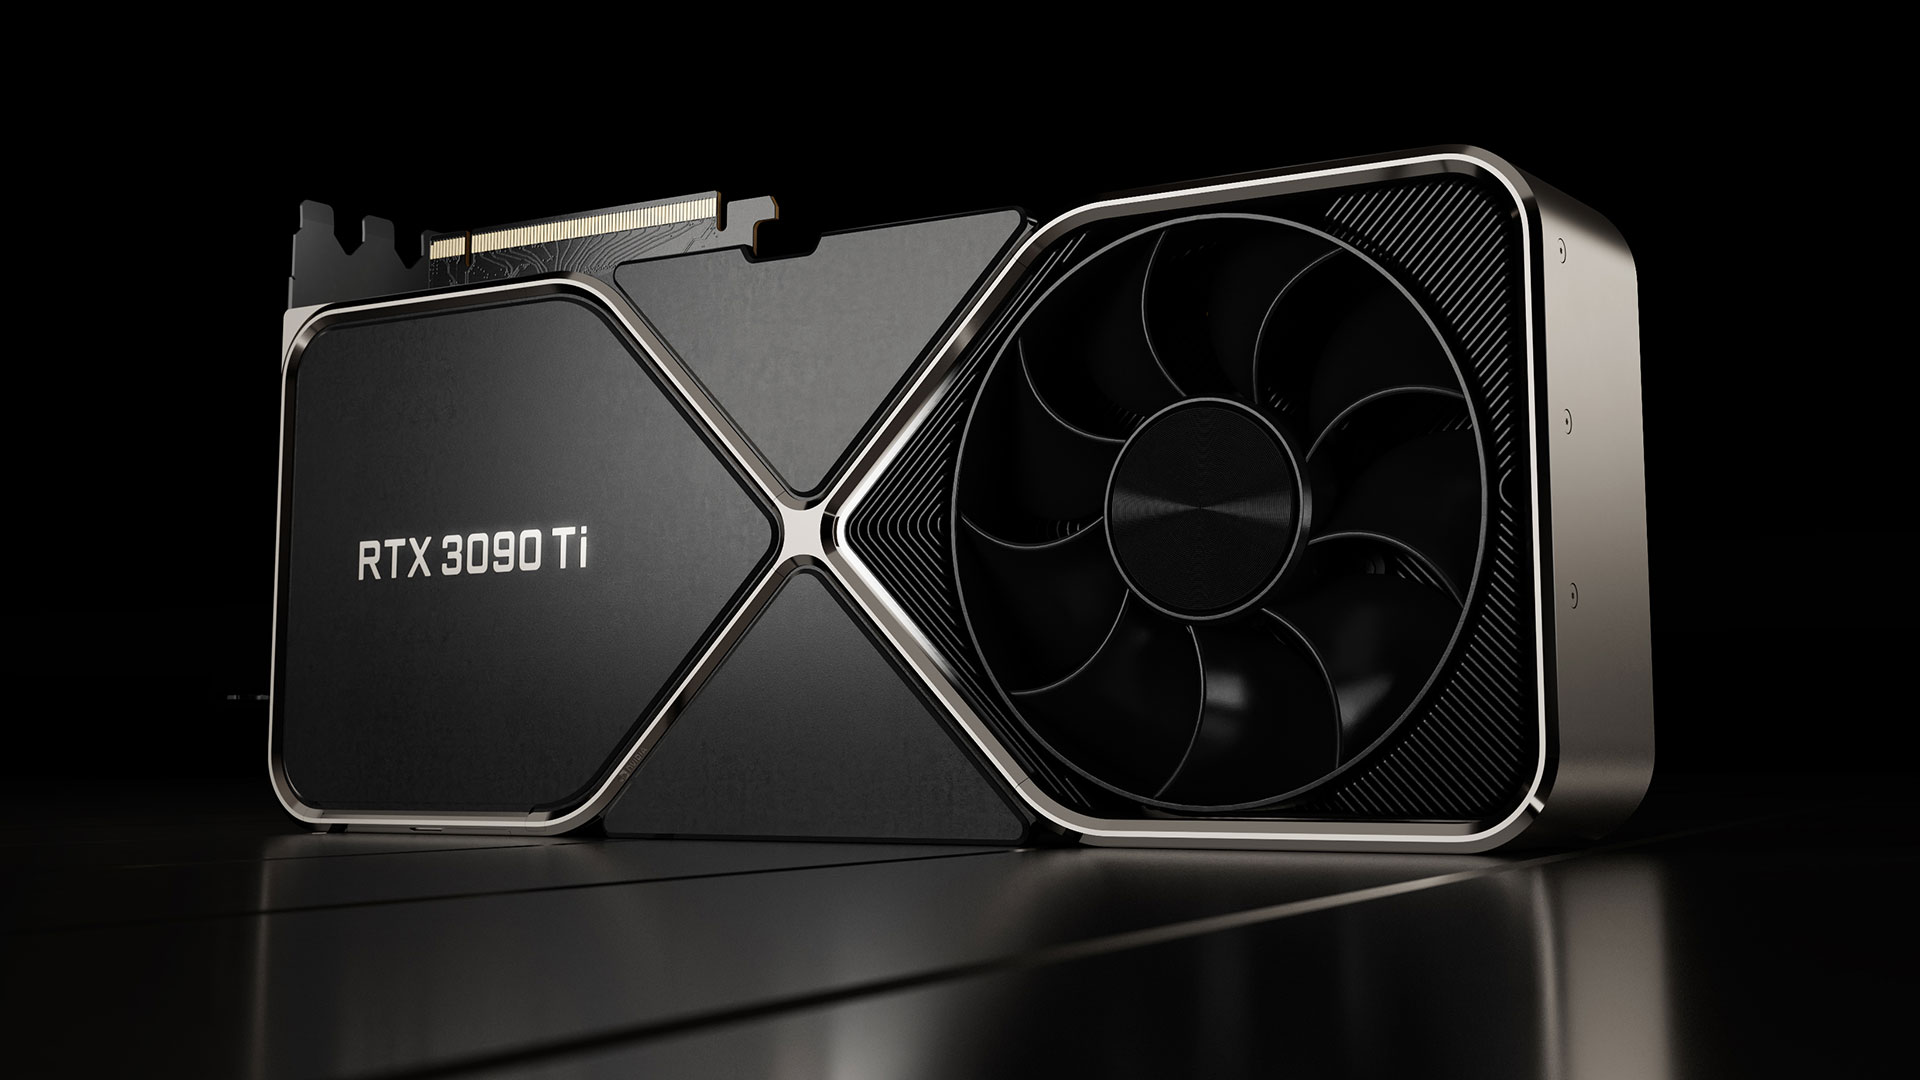 Nvidia GeForce RTX 3090 Ti Officially Launches, Starting at $1,999